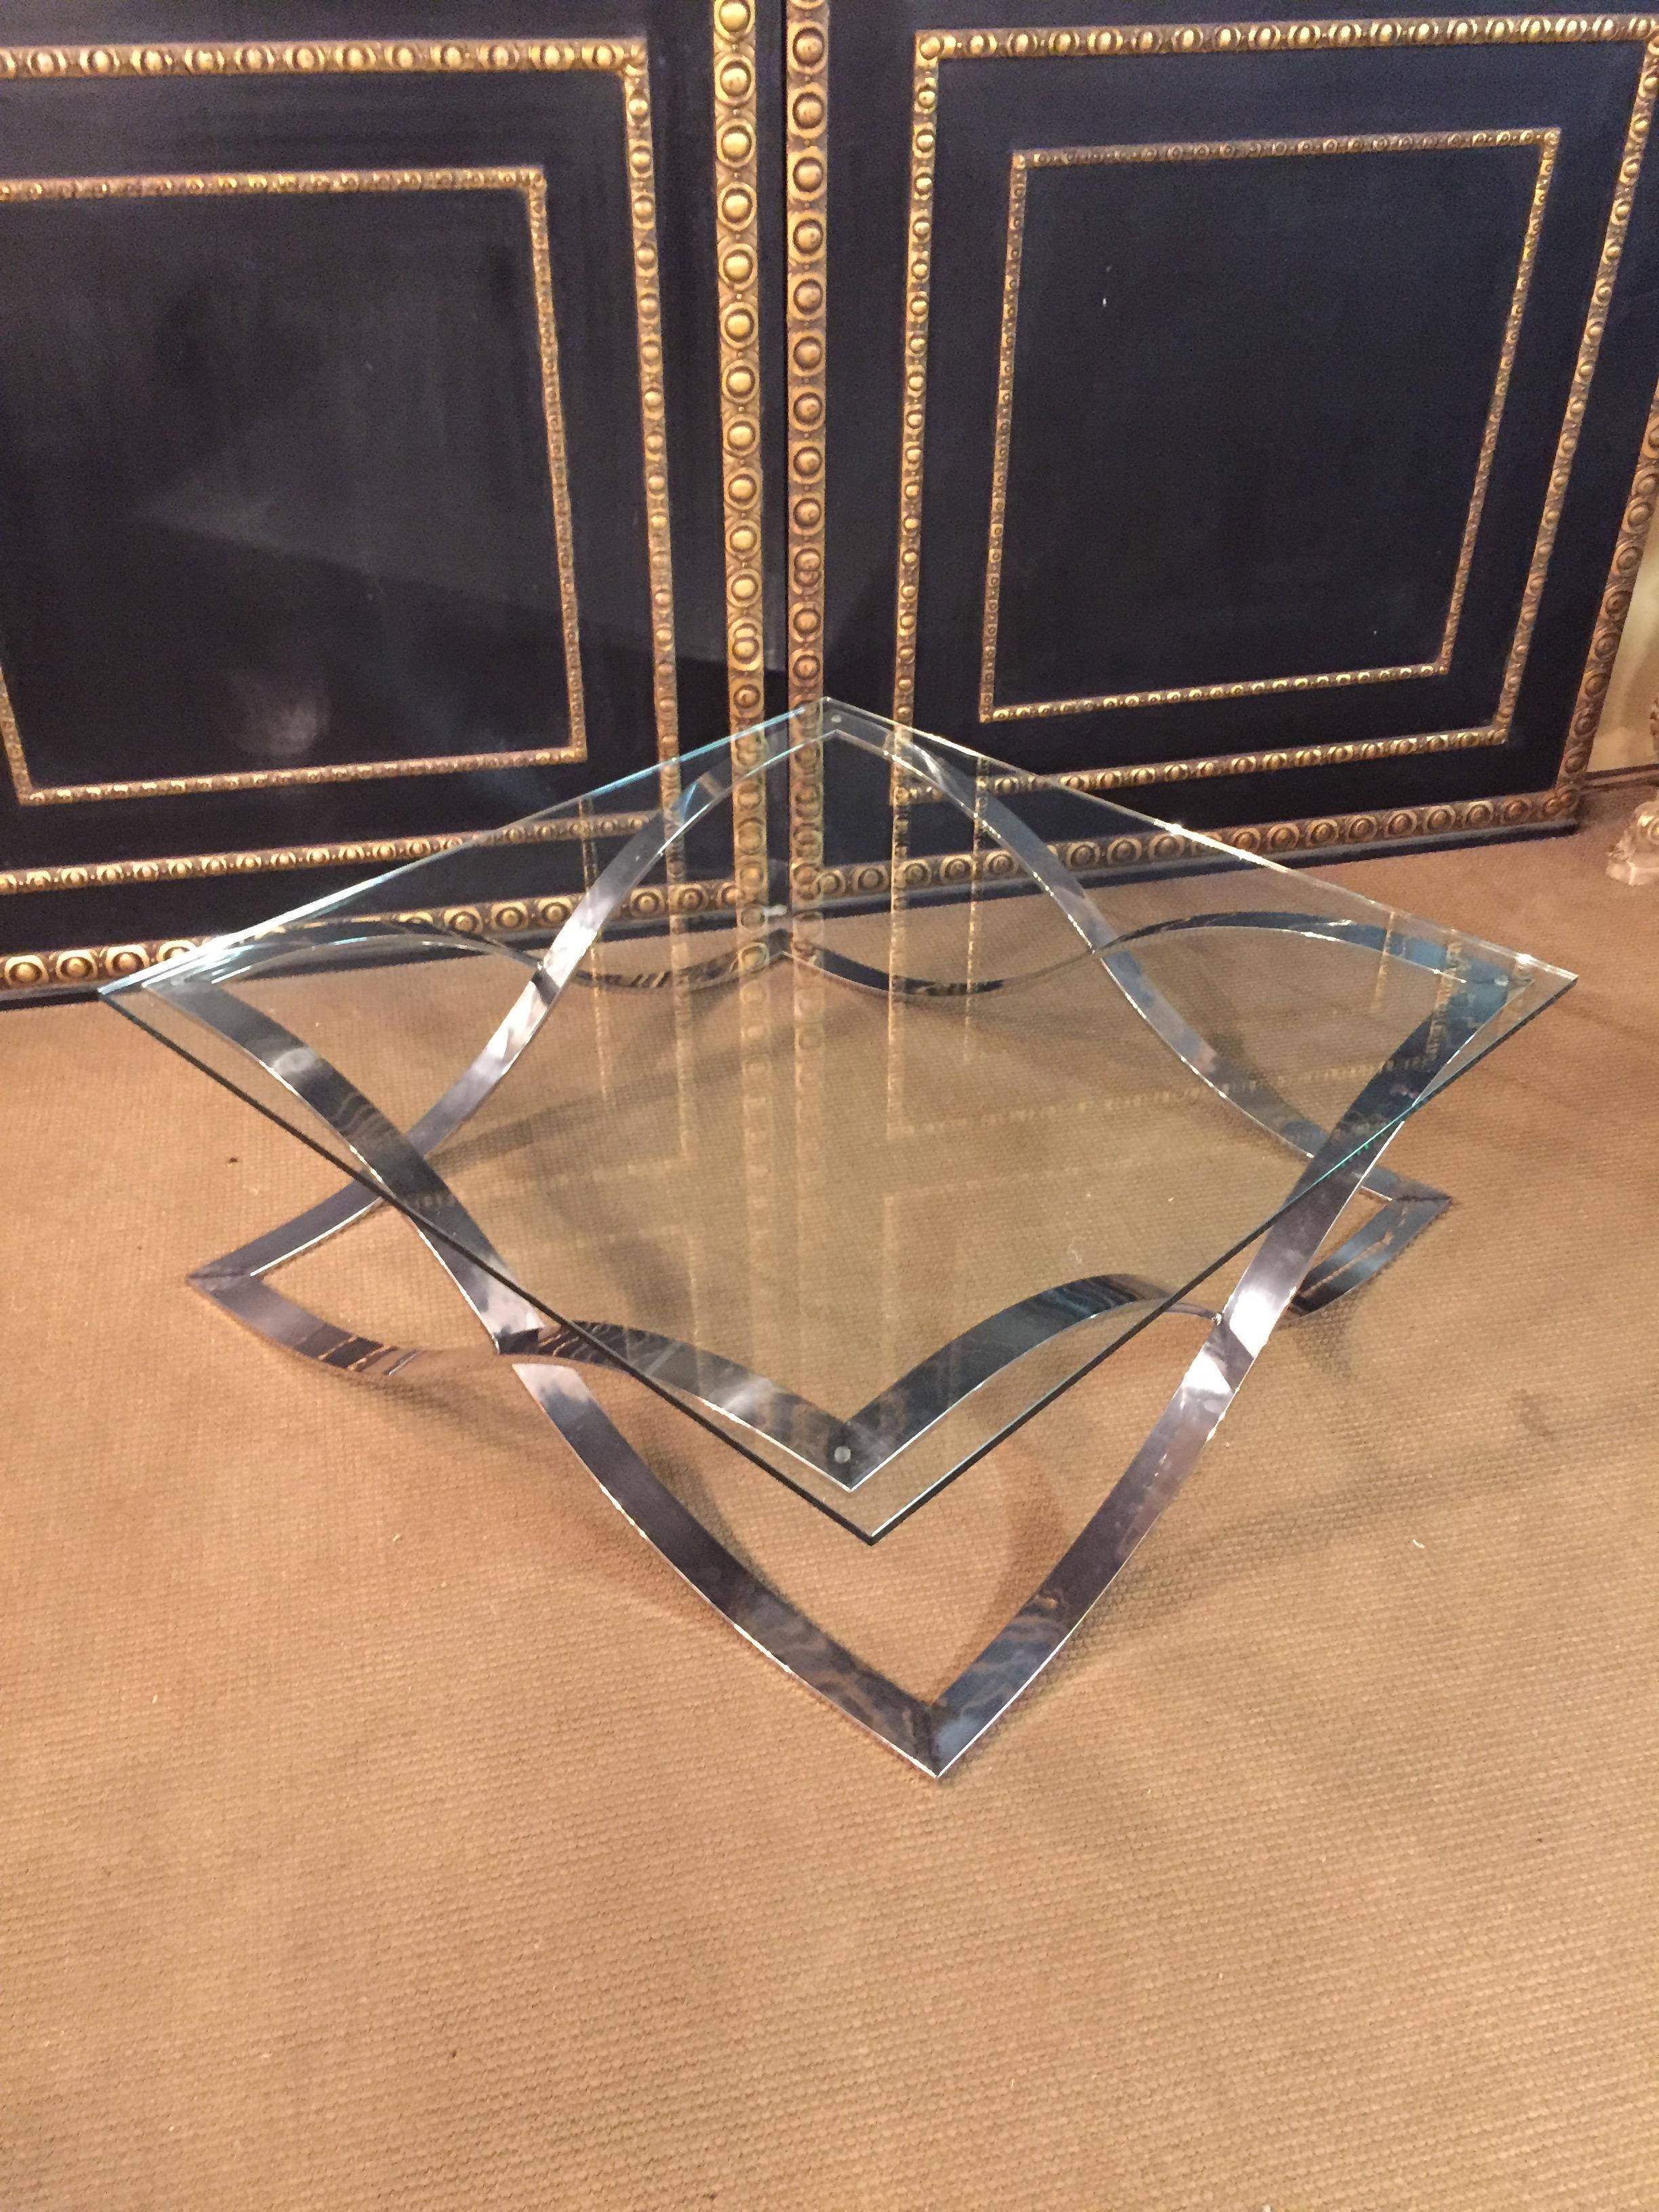 Modern club table chrome frame.
Unique design with glass top 10mm thick.